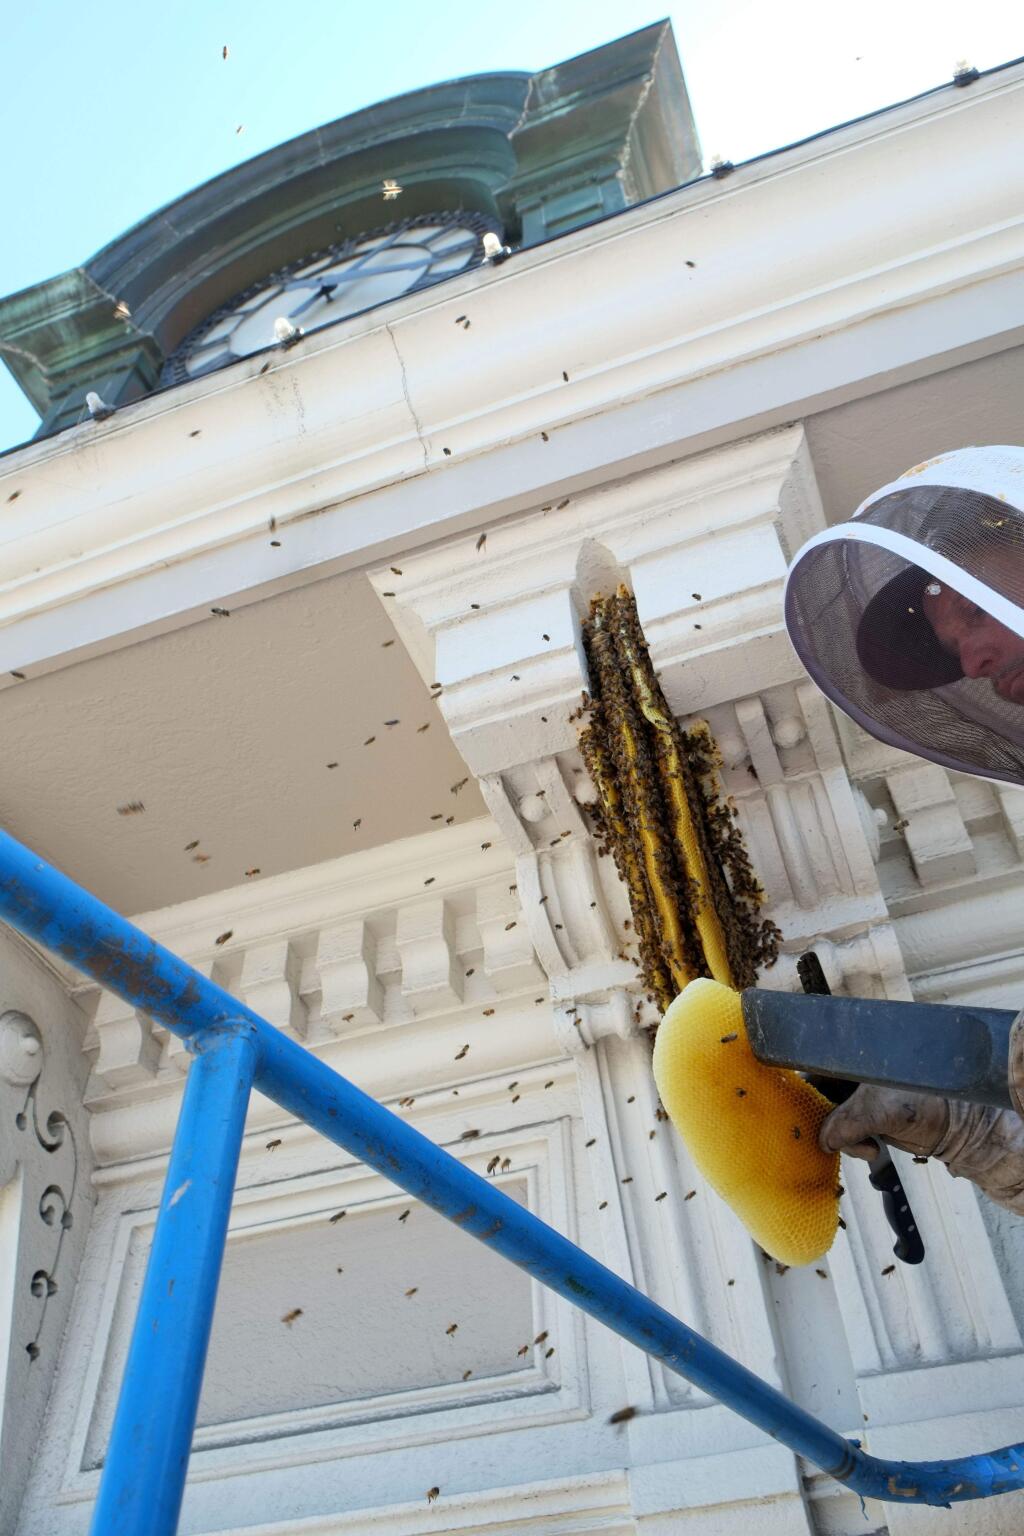 Chris Conrad, of Bee Conscious Bee Removal, uses a custom-made vacuum to carefully remove bees that have established a colony under the roof of the masonic hall in downtown Petaluma on Thursday, Aug. 11, 2016 (Eric Gneckow/Argus-Courier staff)